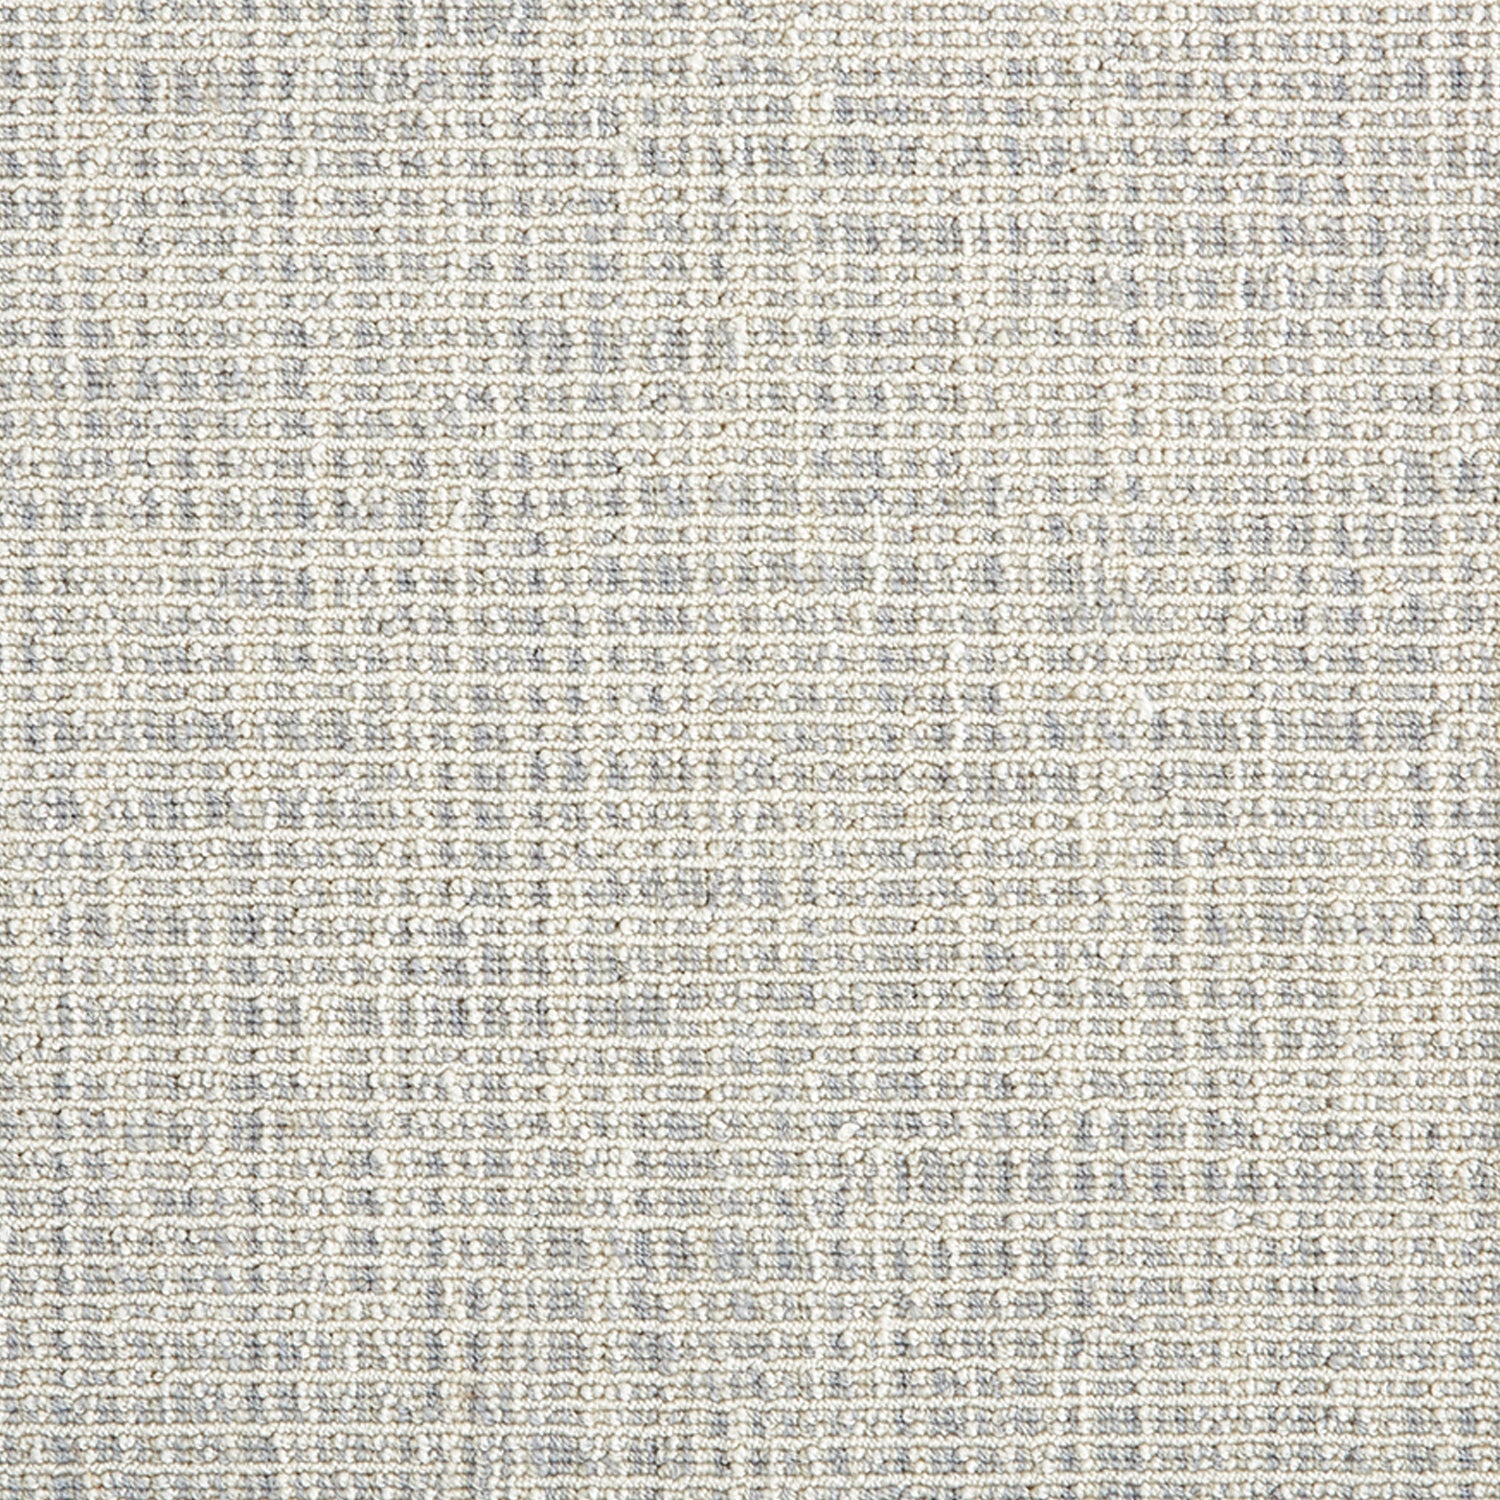 Synthetic blend broadloom carpet swatch in a woven stripe pattern in cream and gray-blue.